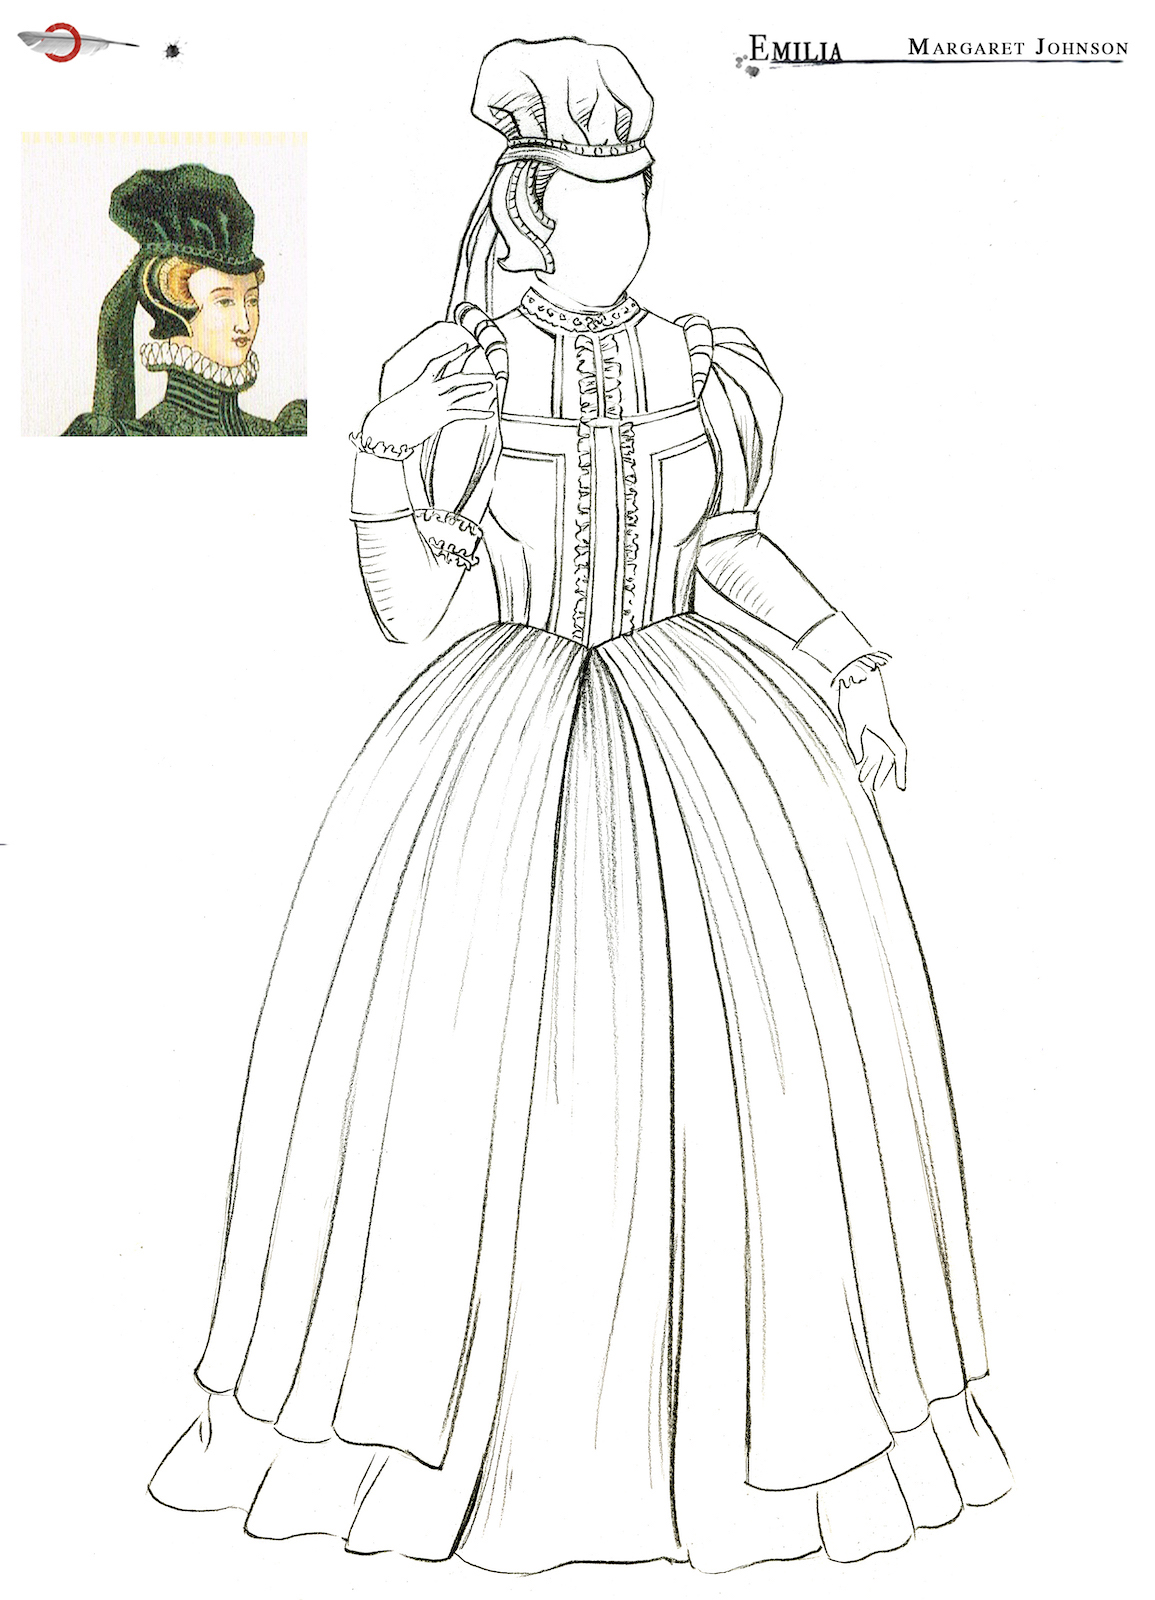 An outline sketch of an Elizabethan dress and headwear